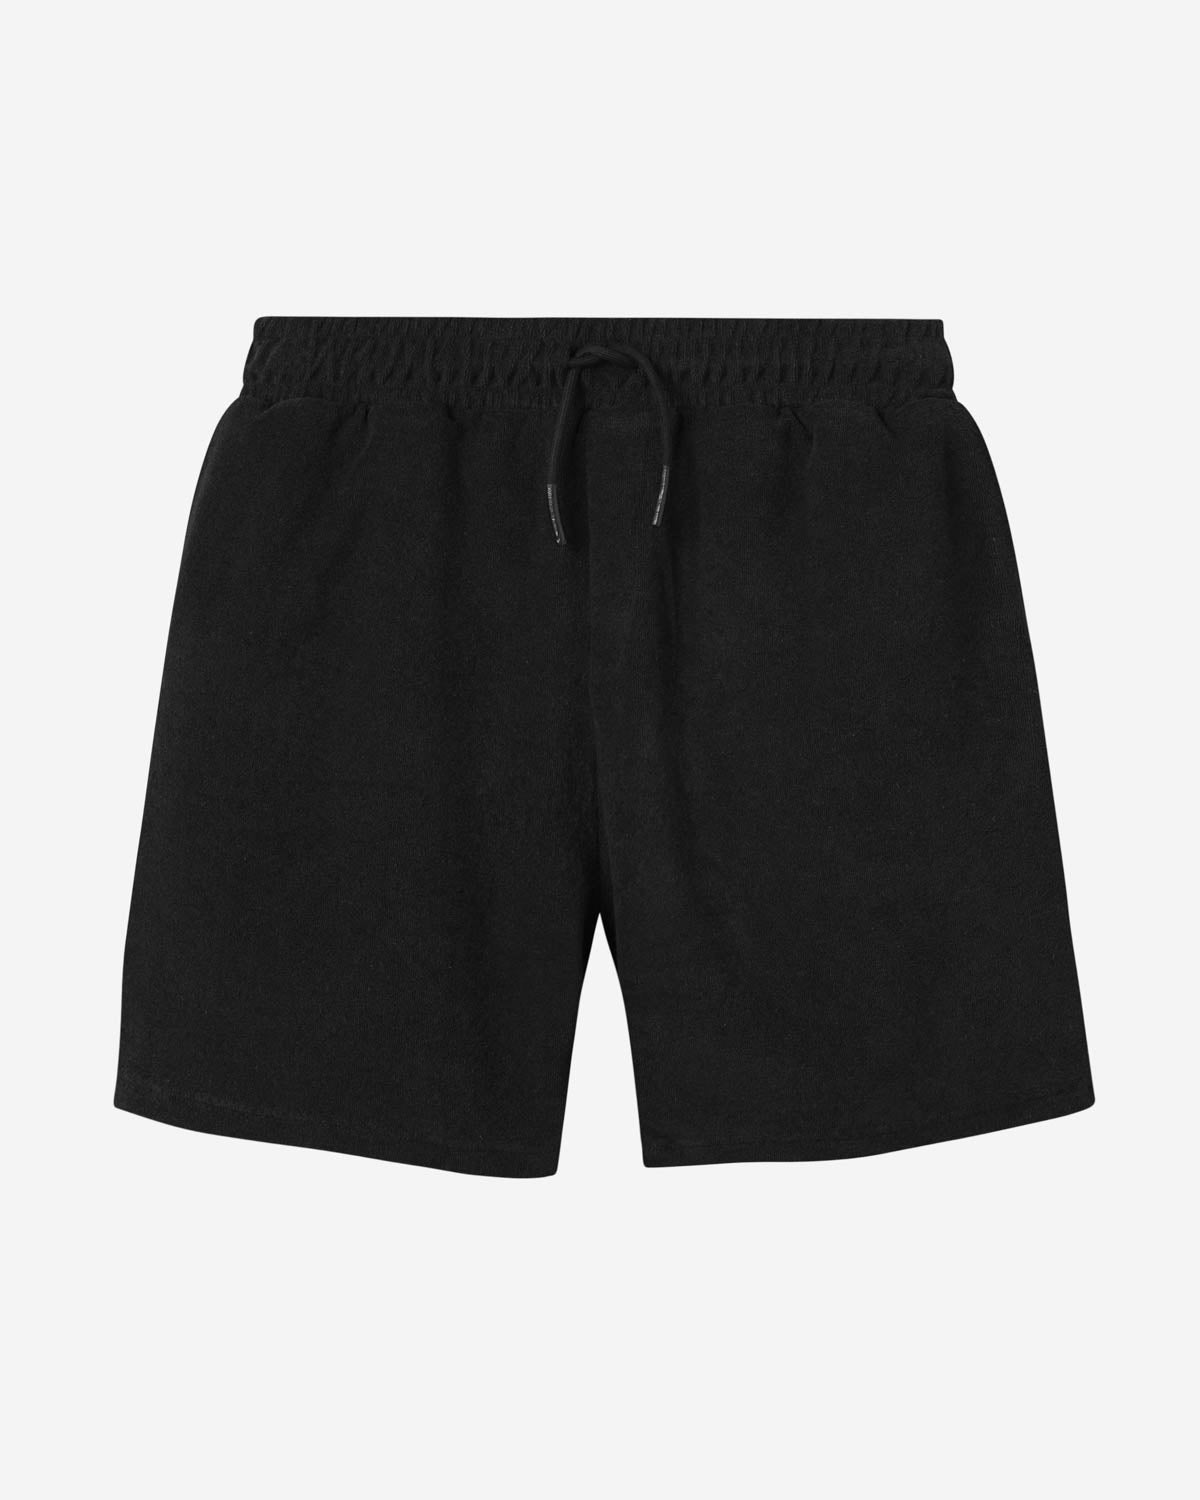 Black mid length shorts in terry toweling fabric with drawdtring and two side pockets.